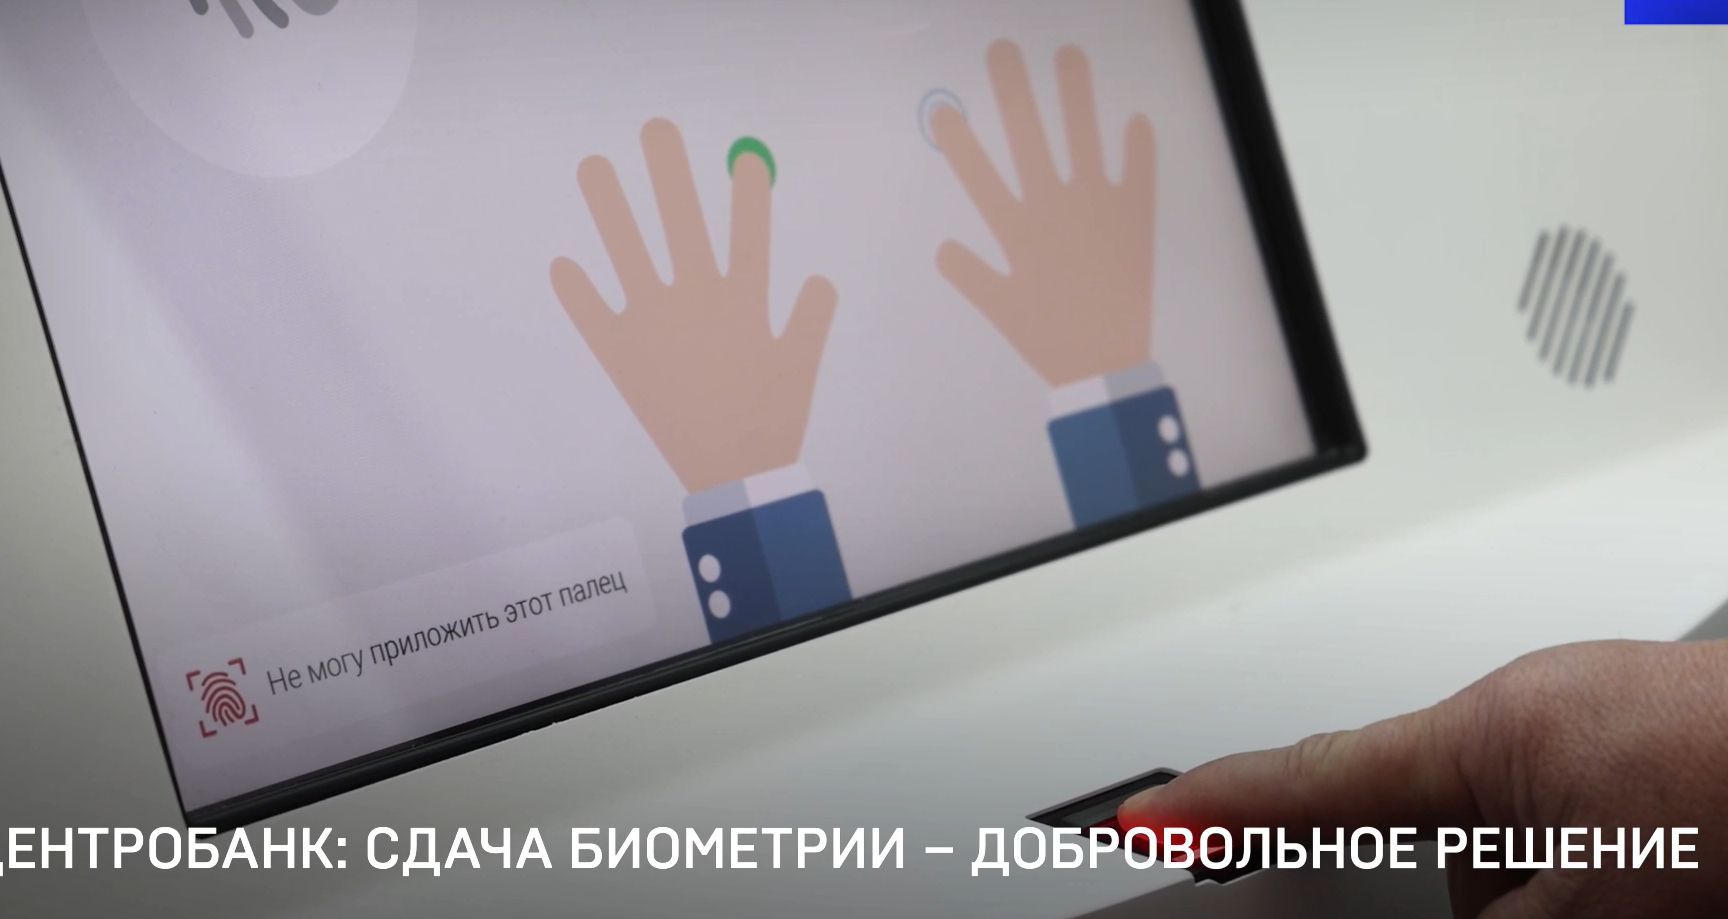 A Russian man submits biometric data to the Unified Biometric System (UBS) database.